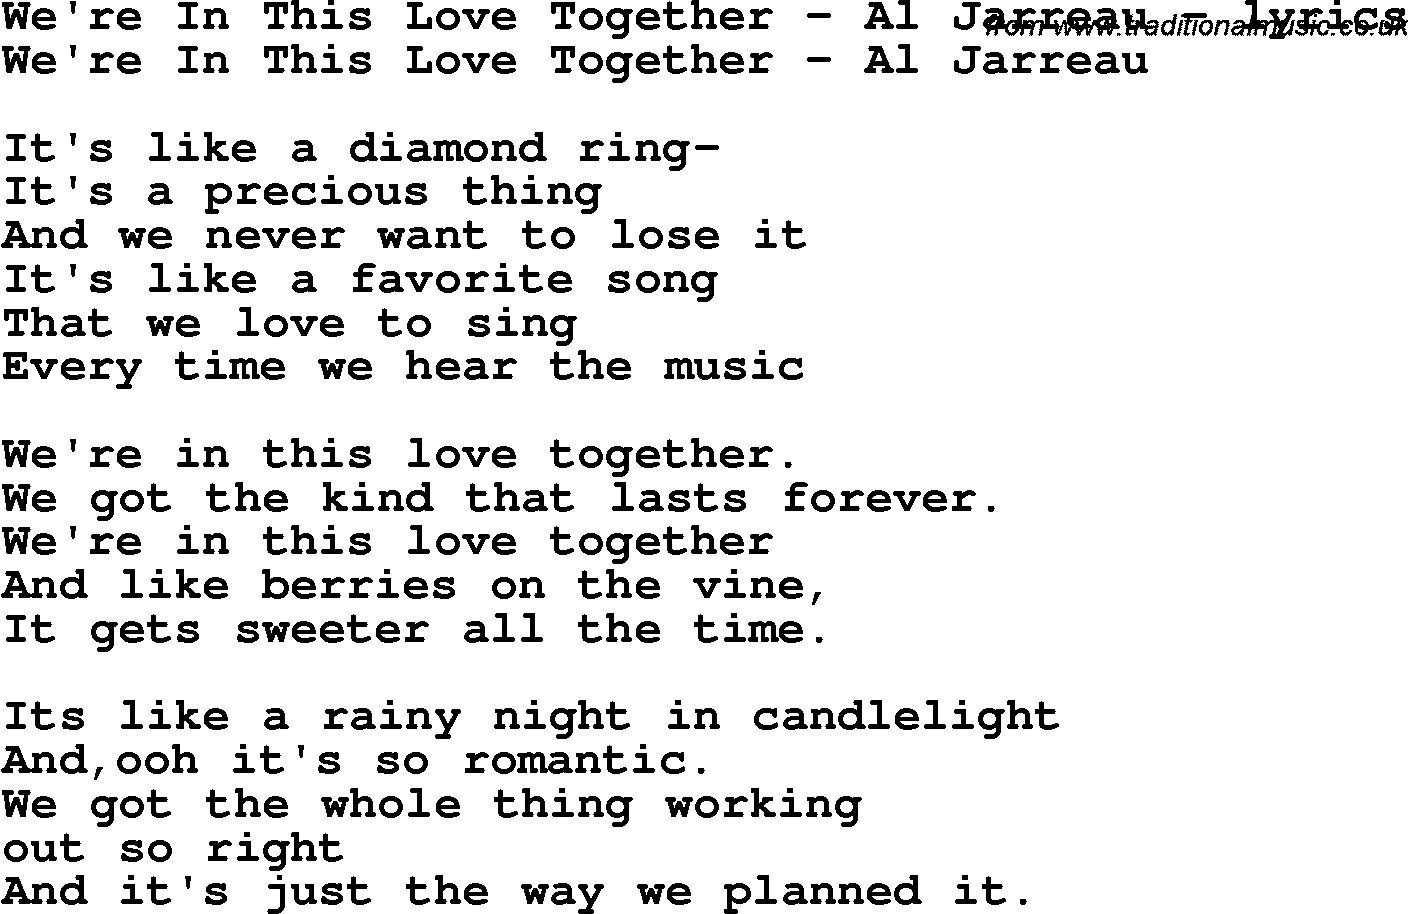 Love Song Lyrics for: We're In This Love Together - Al Jarreau